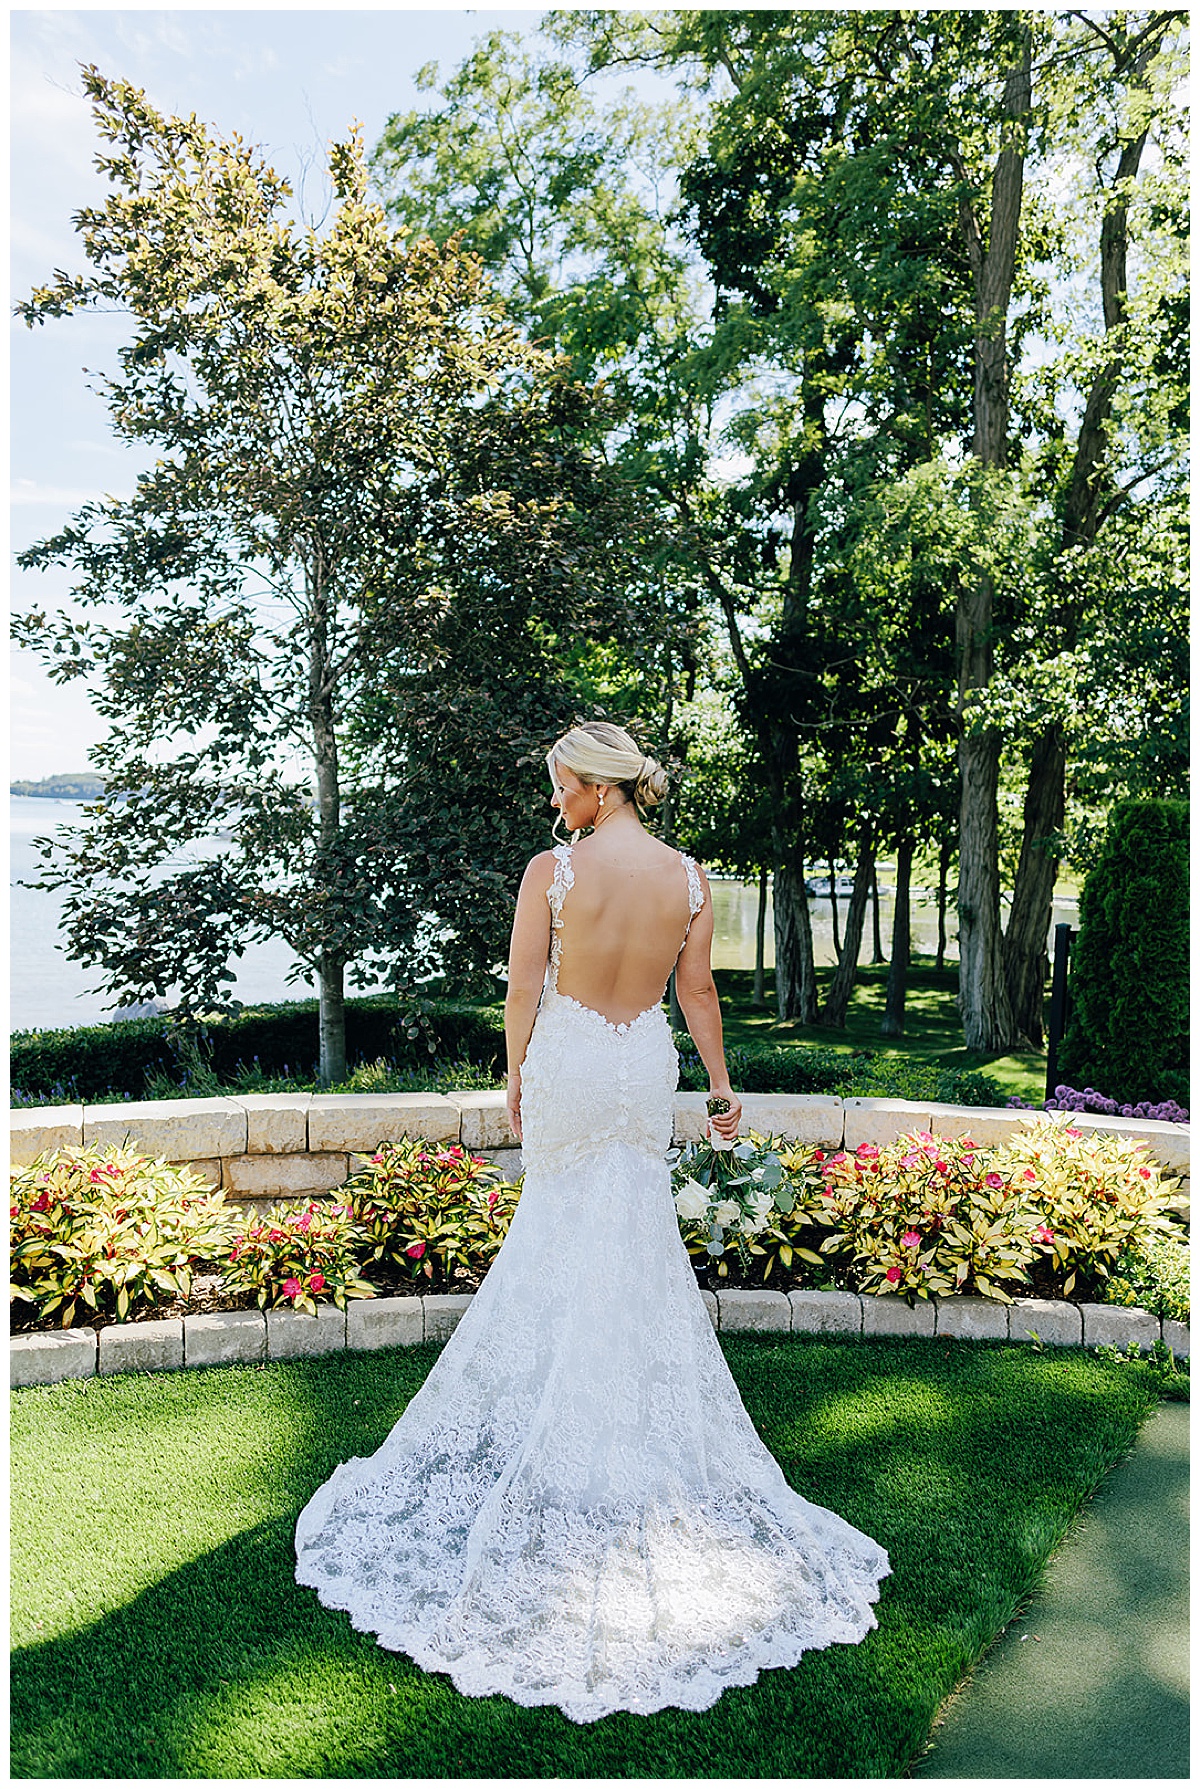 Stunning bridal gown before Ovation Yacht Charter